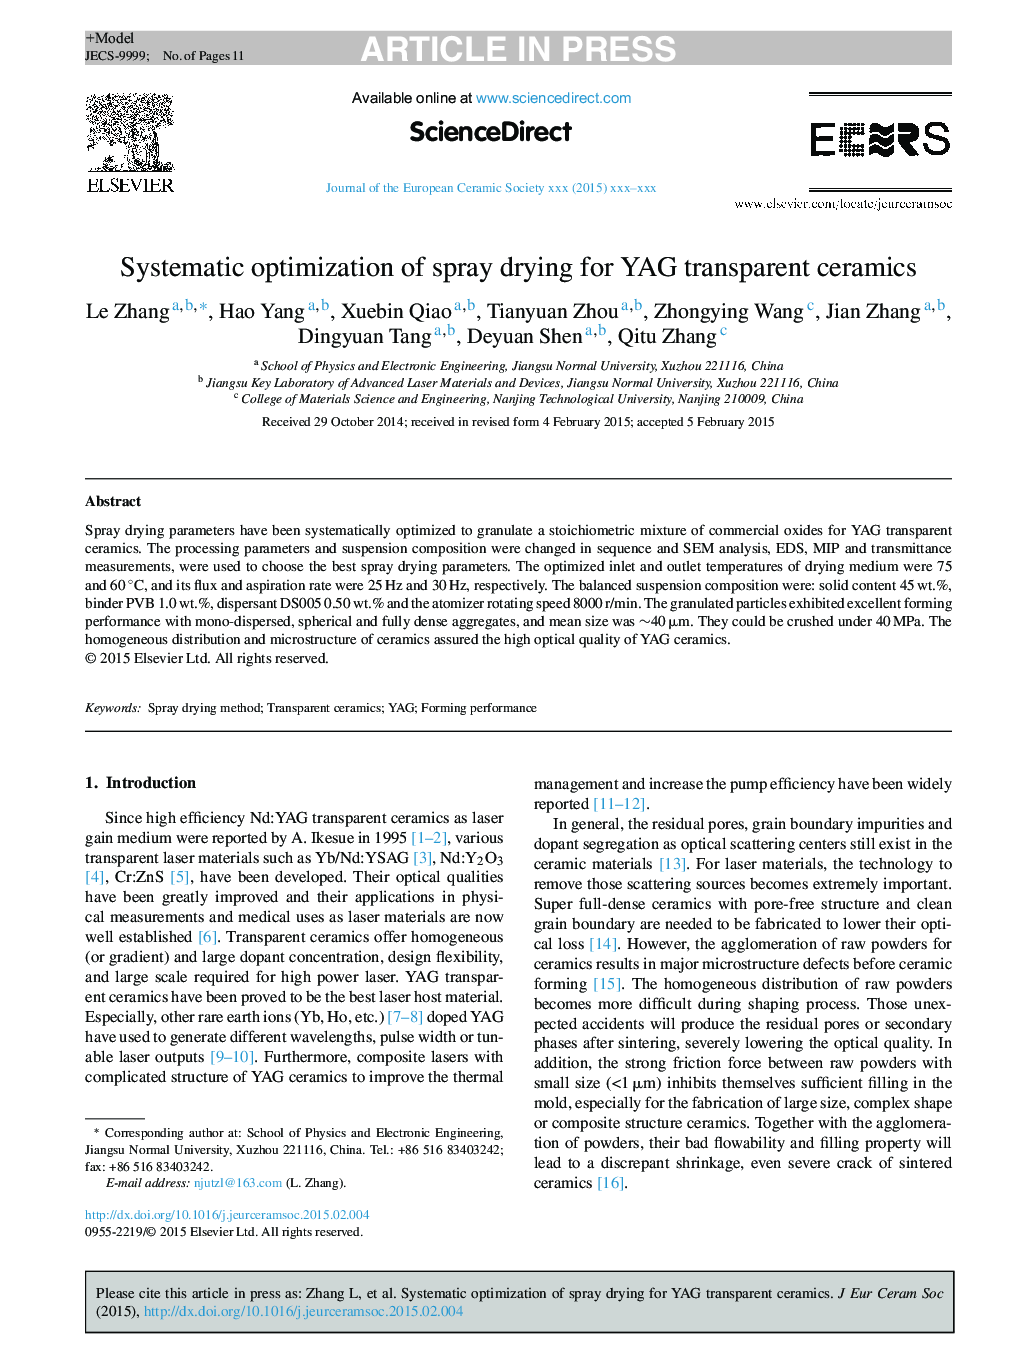 Systematic optimization of spray drying for YAG transparent ceramics